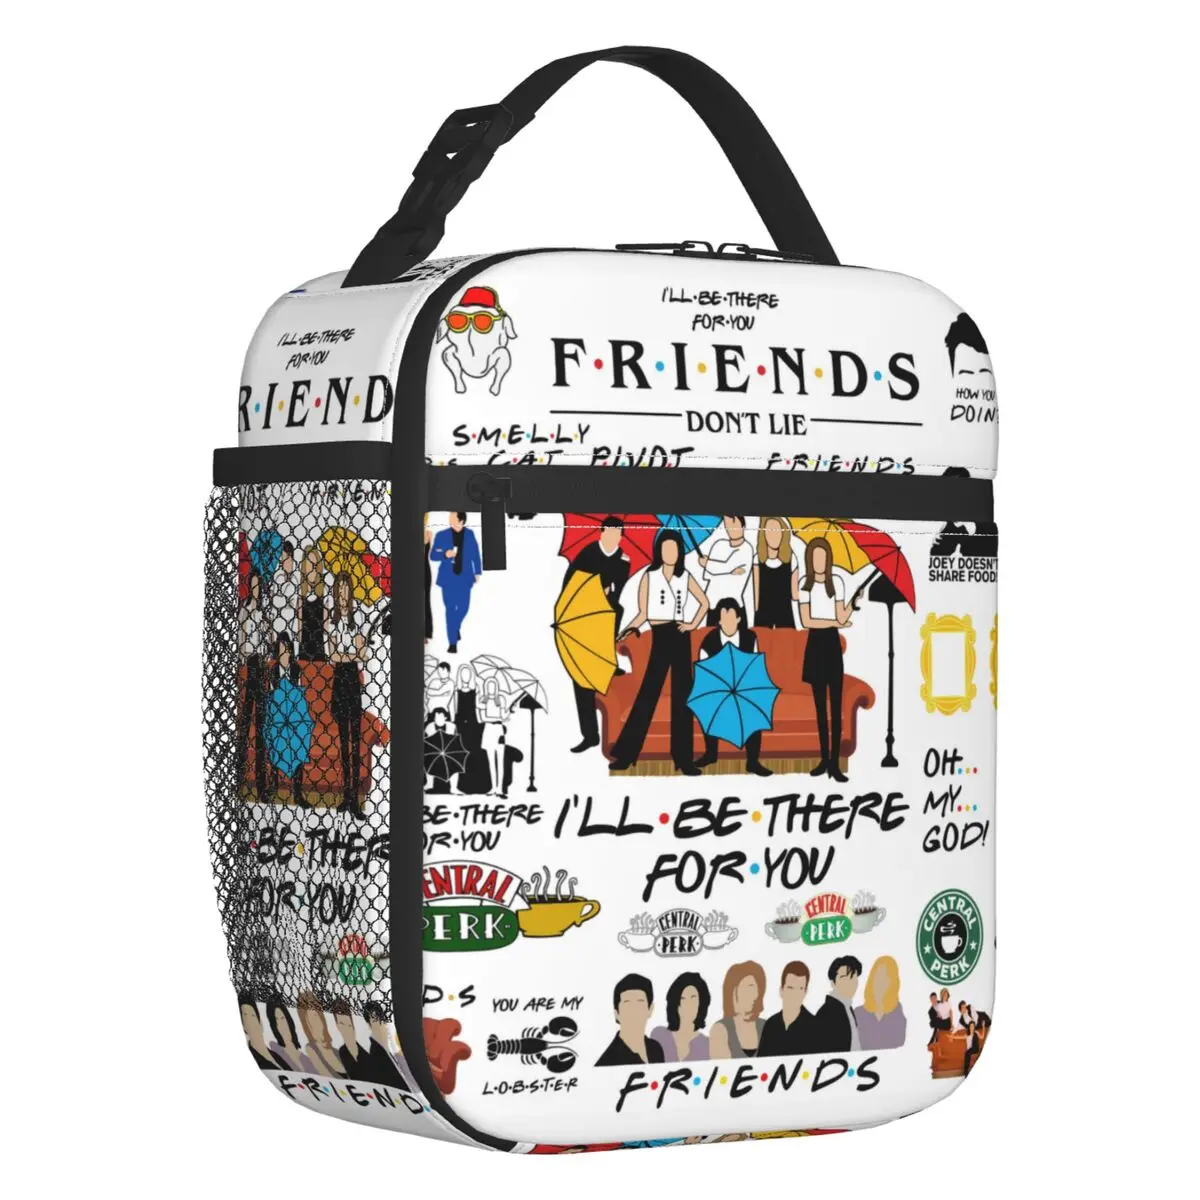 

Funny TV Show Friends Collage Insulated Lunch Bags for Women Portable Cooler Thermal Bento Box Outdoor Camping Travel